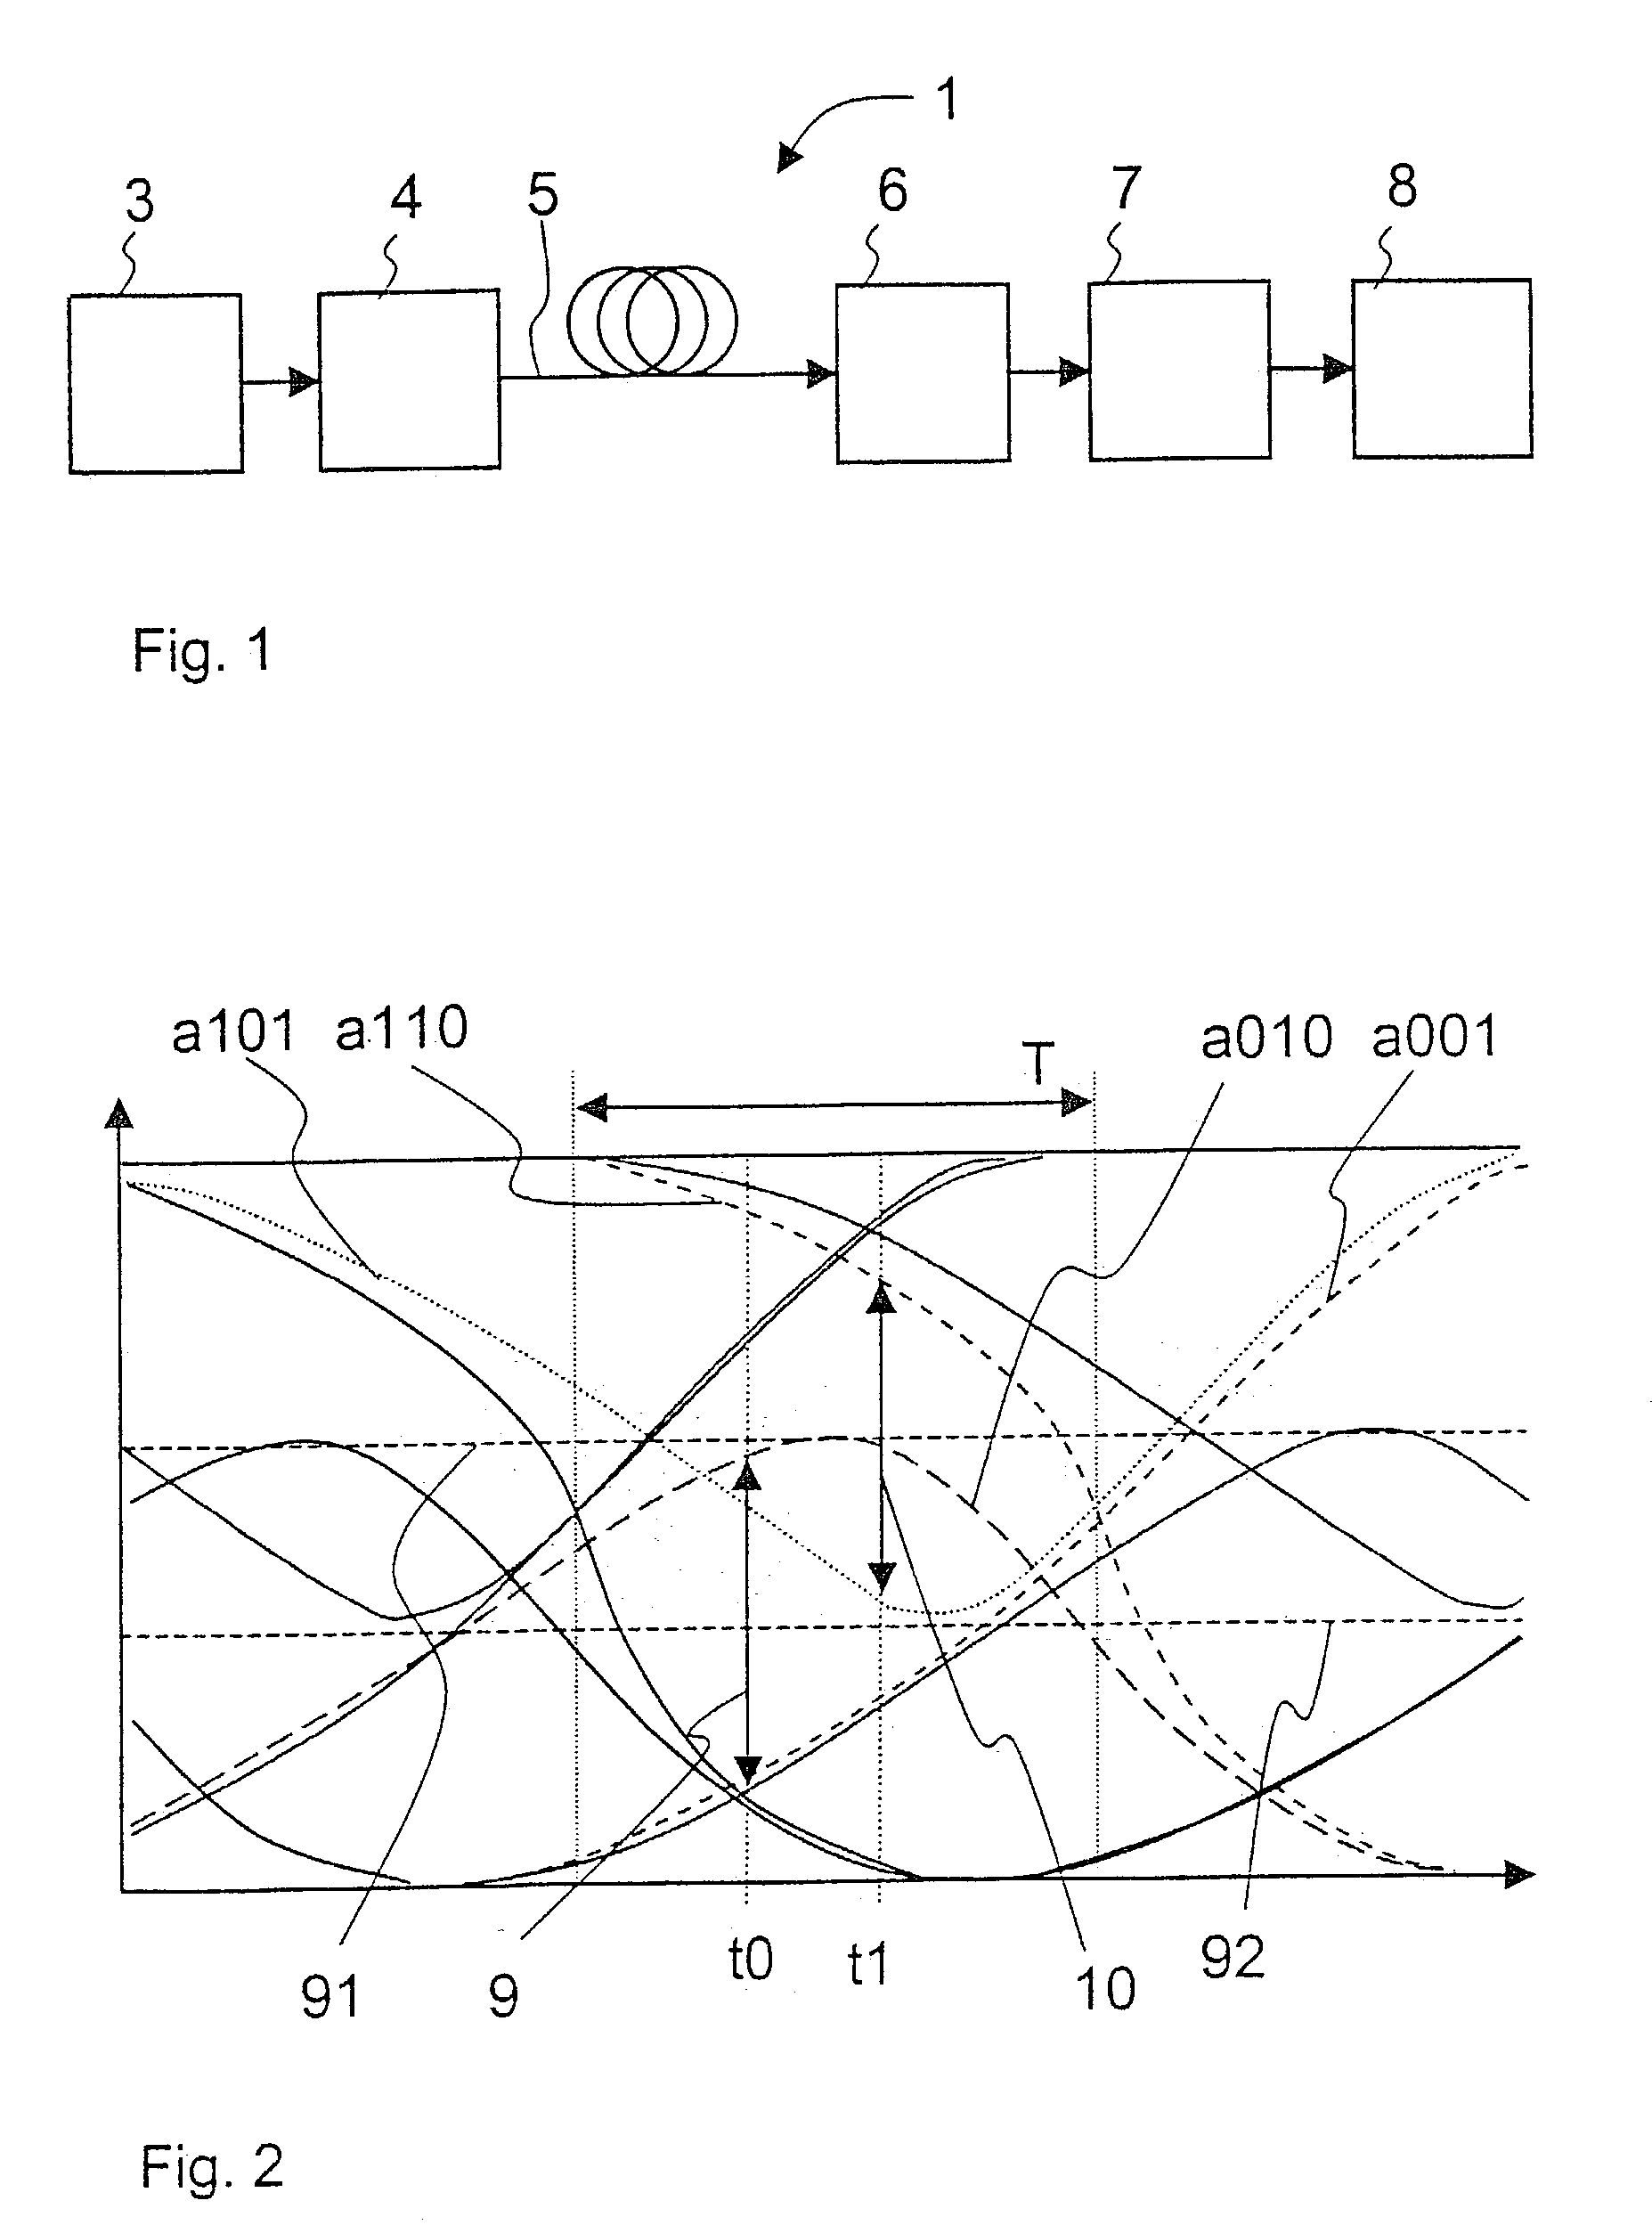 Decision feedback structure with selective sampling phase control